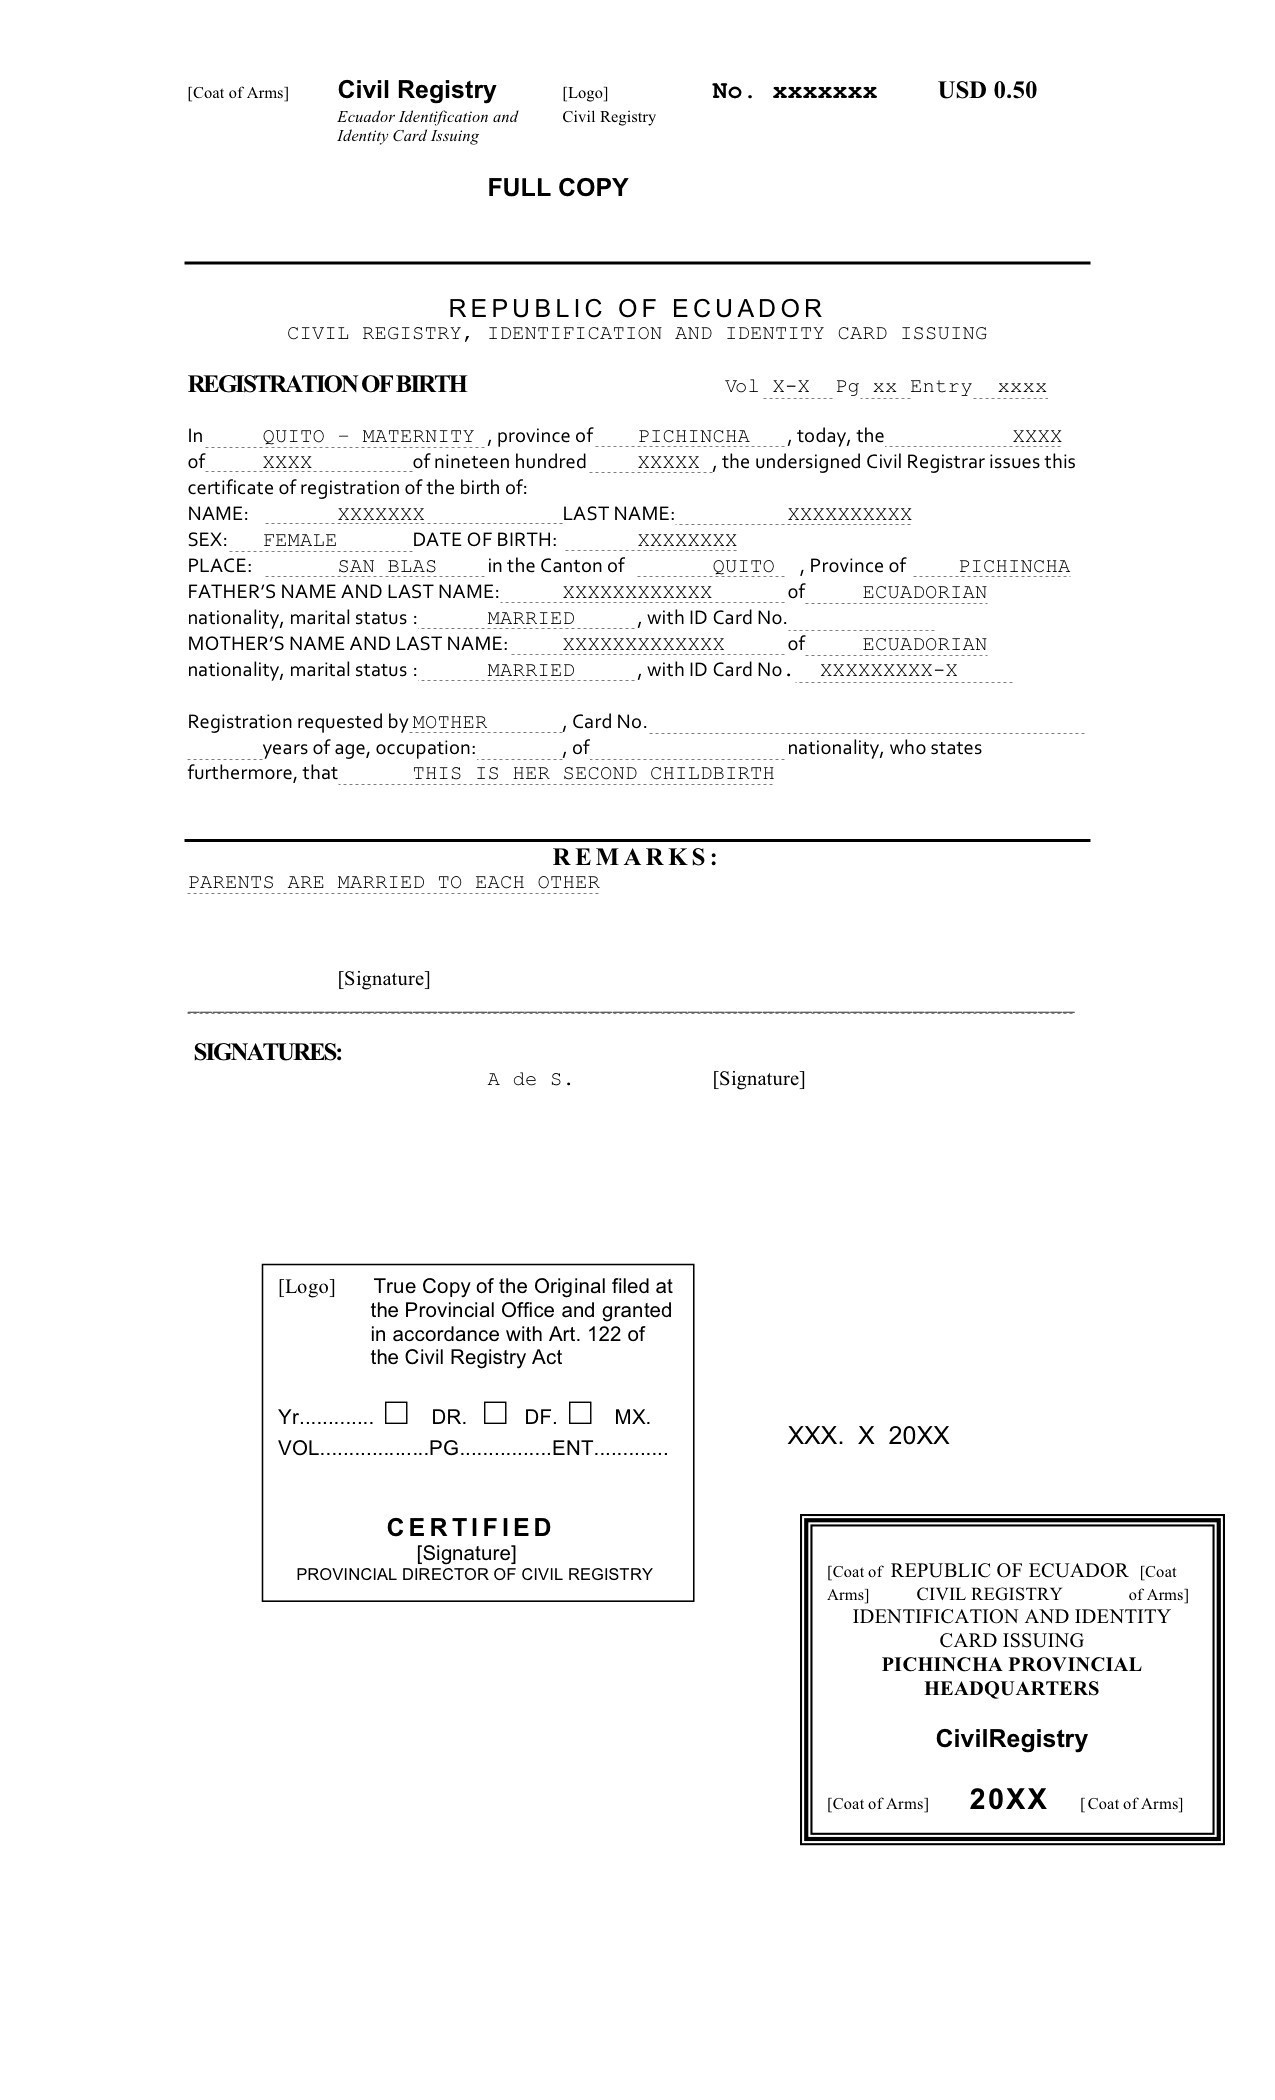 Death Certificate Translation From Spanish To English Sample Pertaining To Death Certificate Translation Template